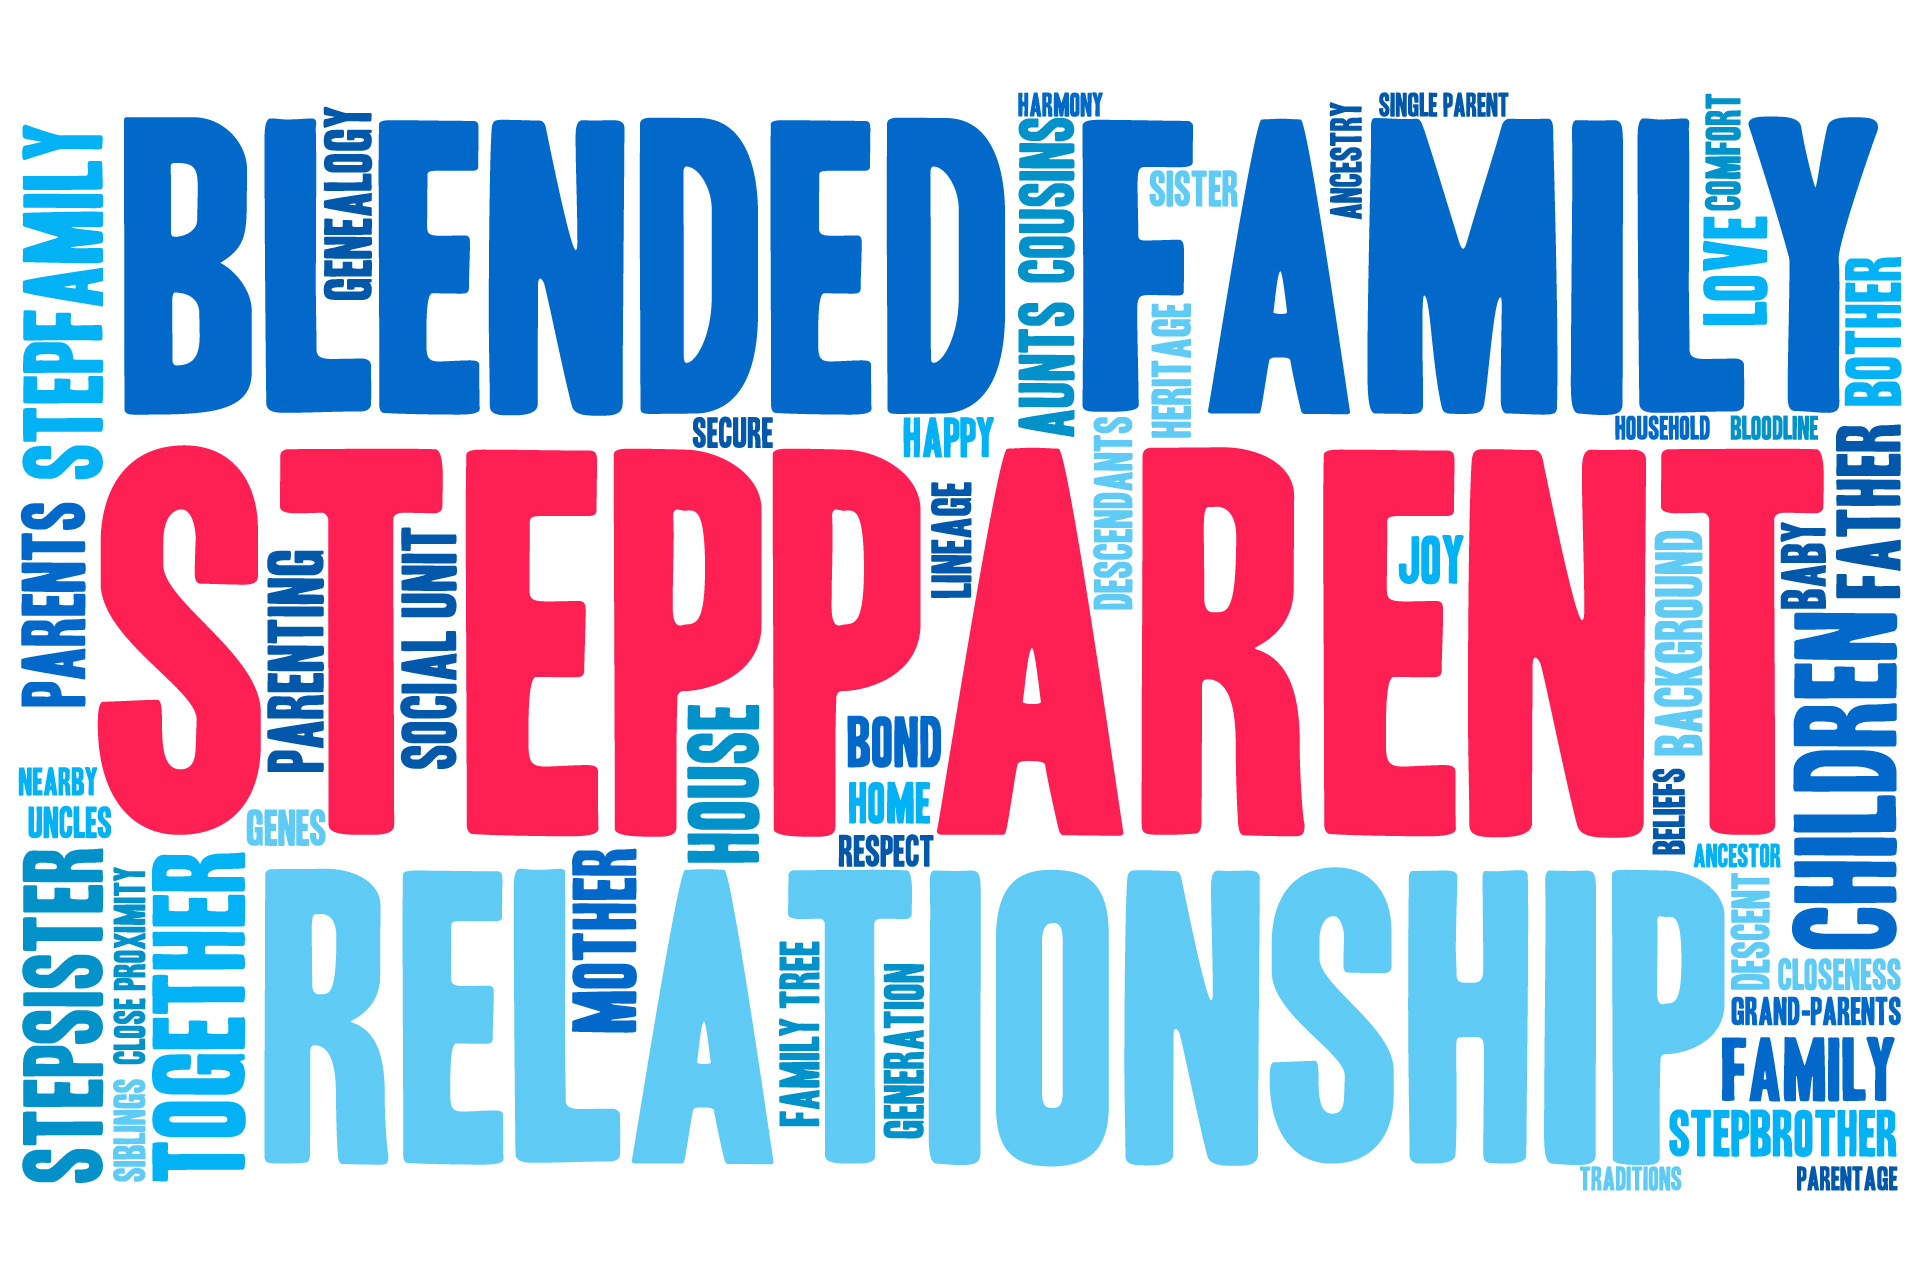 Stepparents Versus Biological Parents: Whose Right is It?